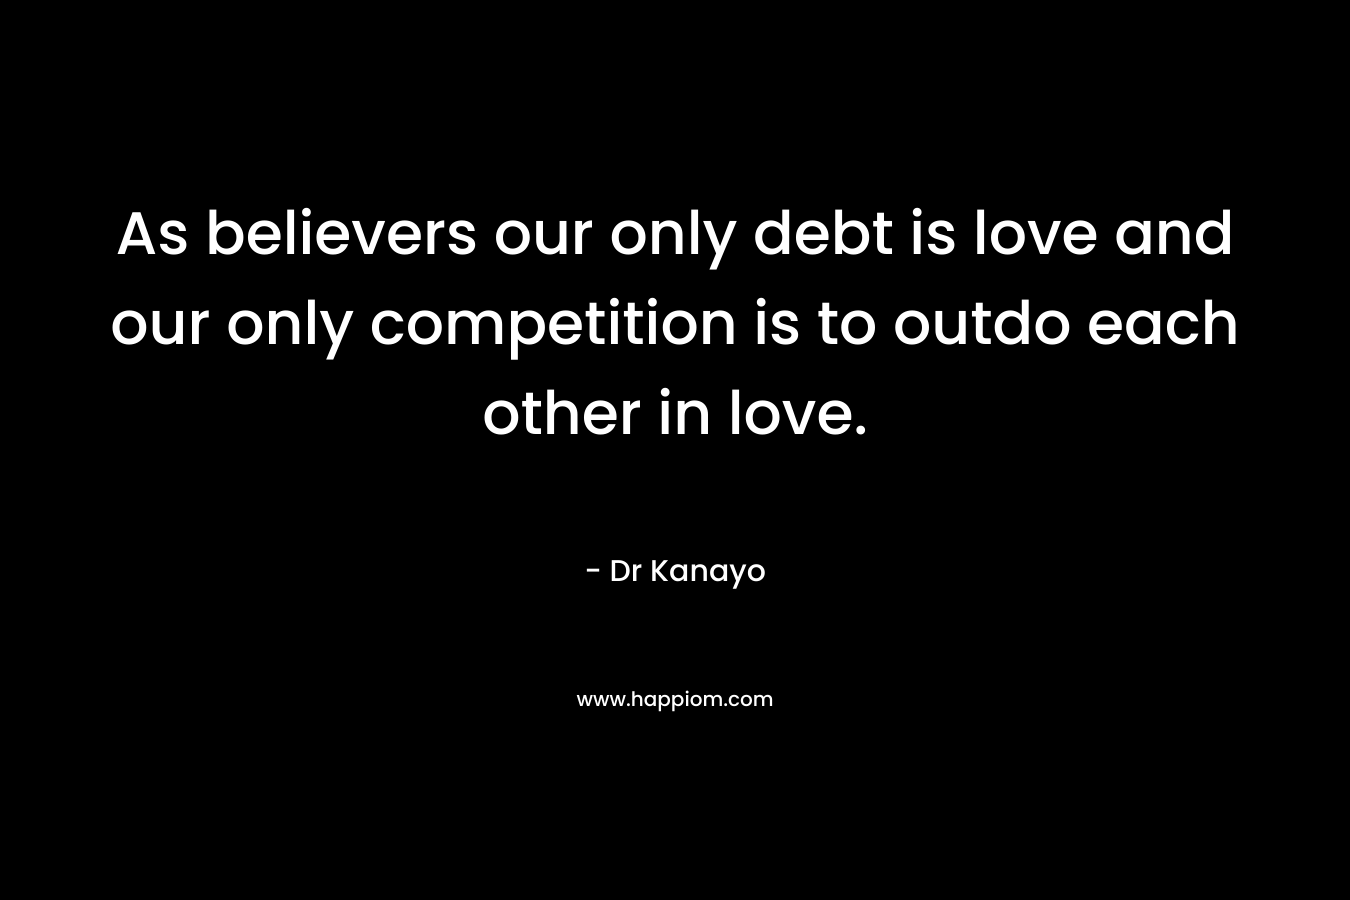 As believers our only debt is love and our only competition is to outdo each other in love. – Dr Kanayo